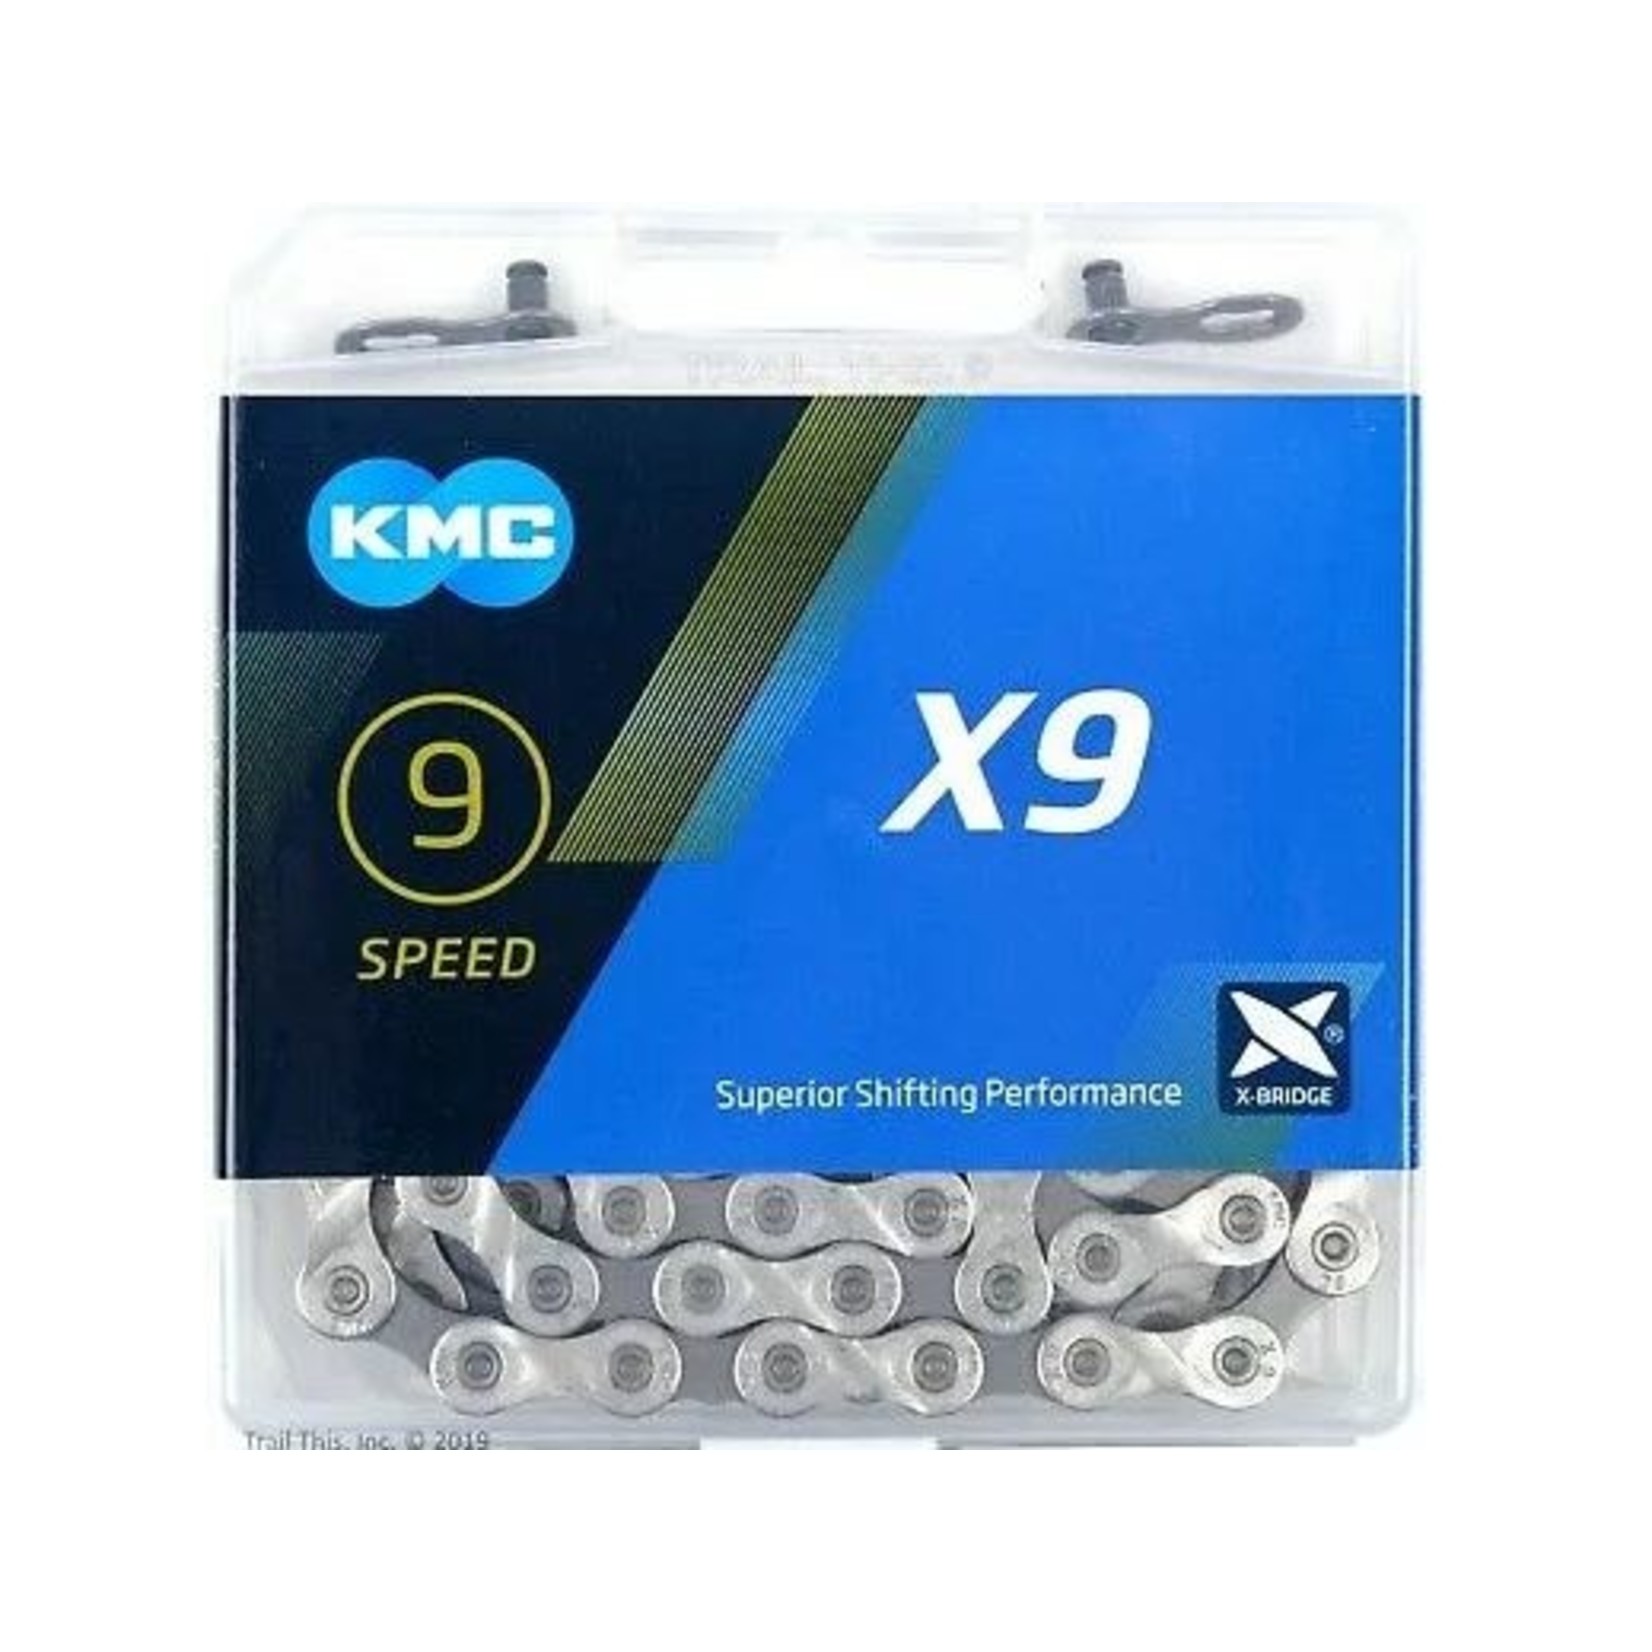 KMC KMC Bike Chain - 9 Speed - X9 - 116 Links With Connect Link- Silver/Grey